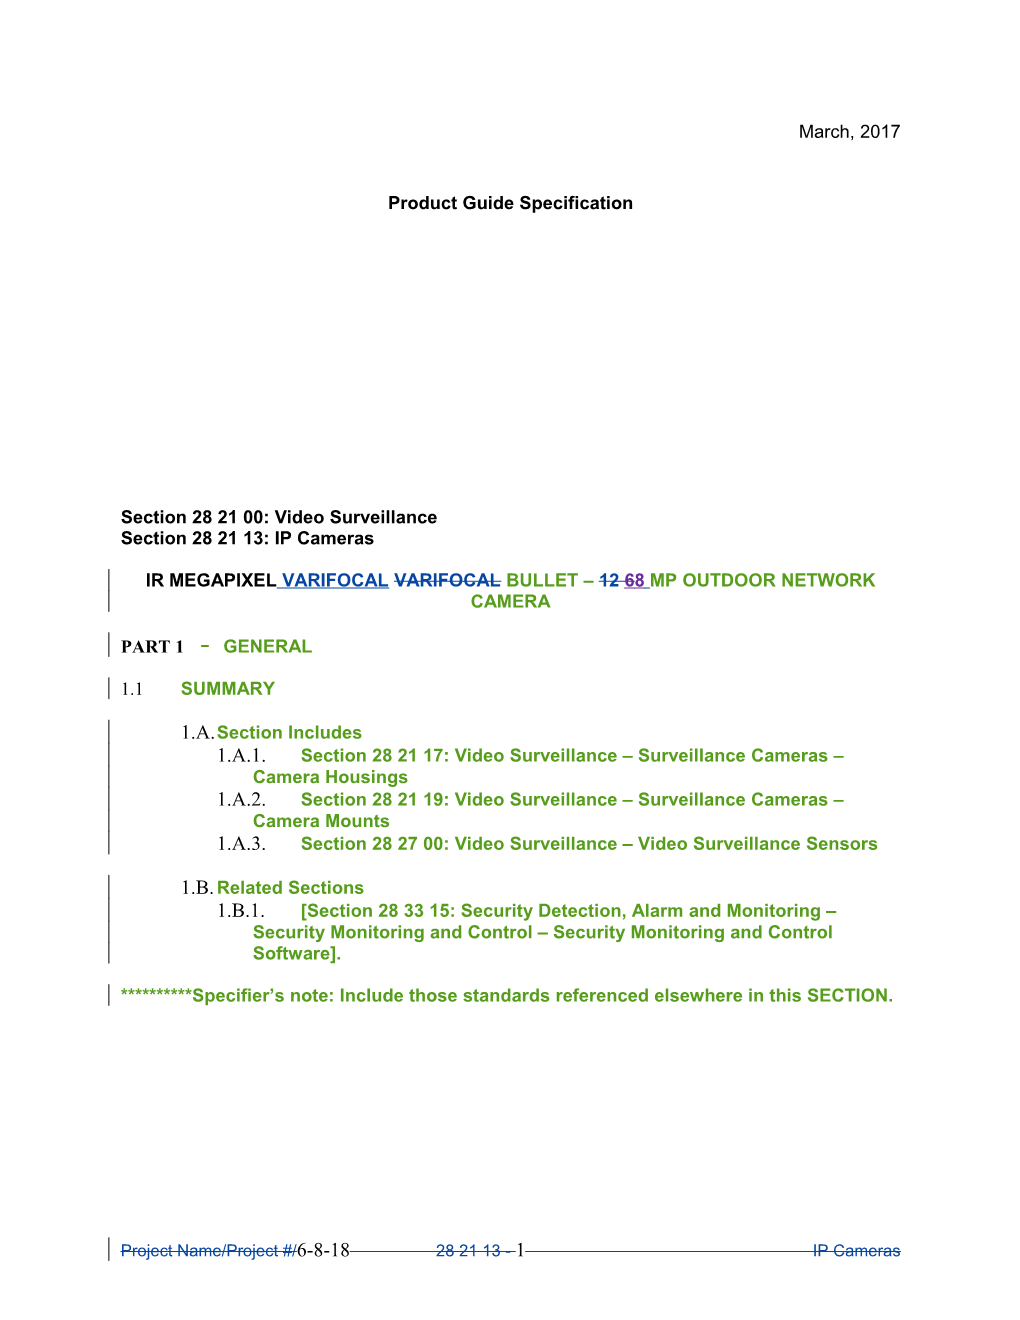 Product Guide Specification s14